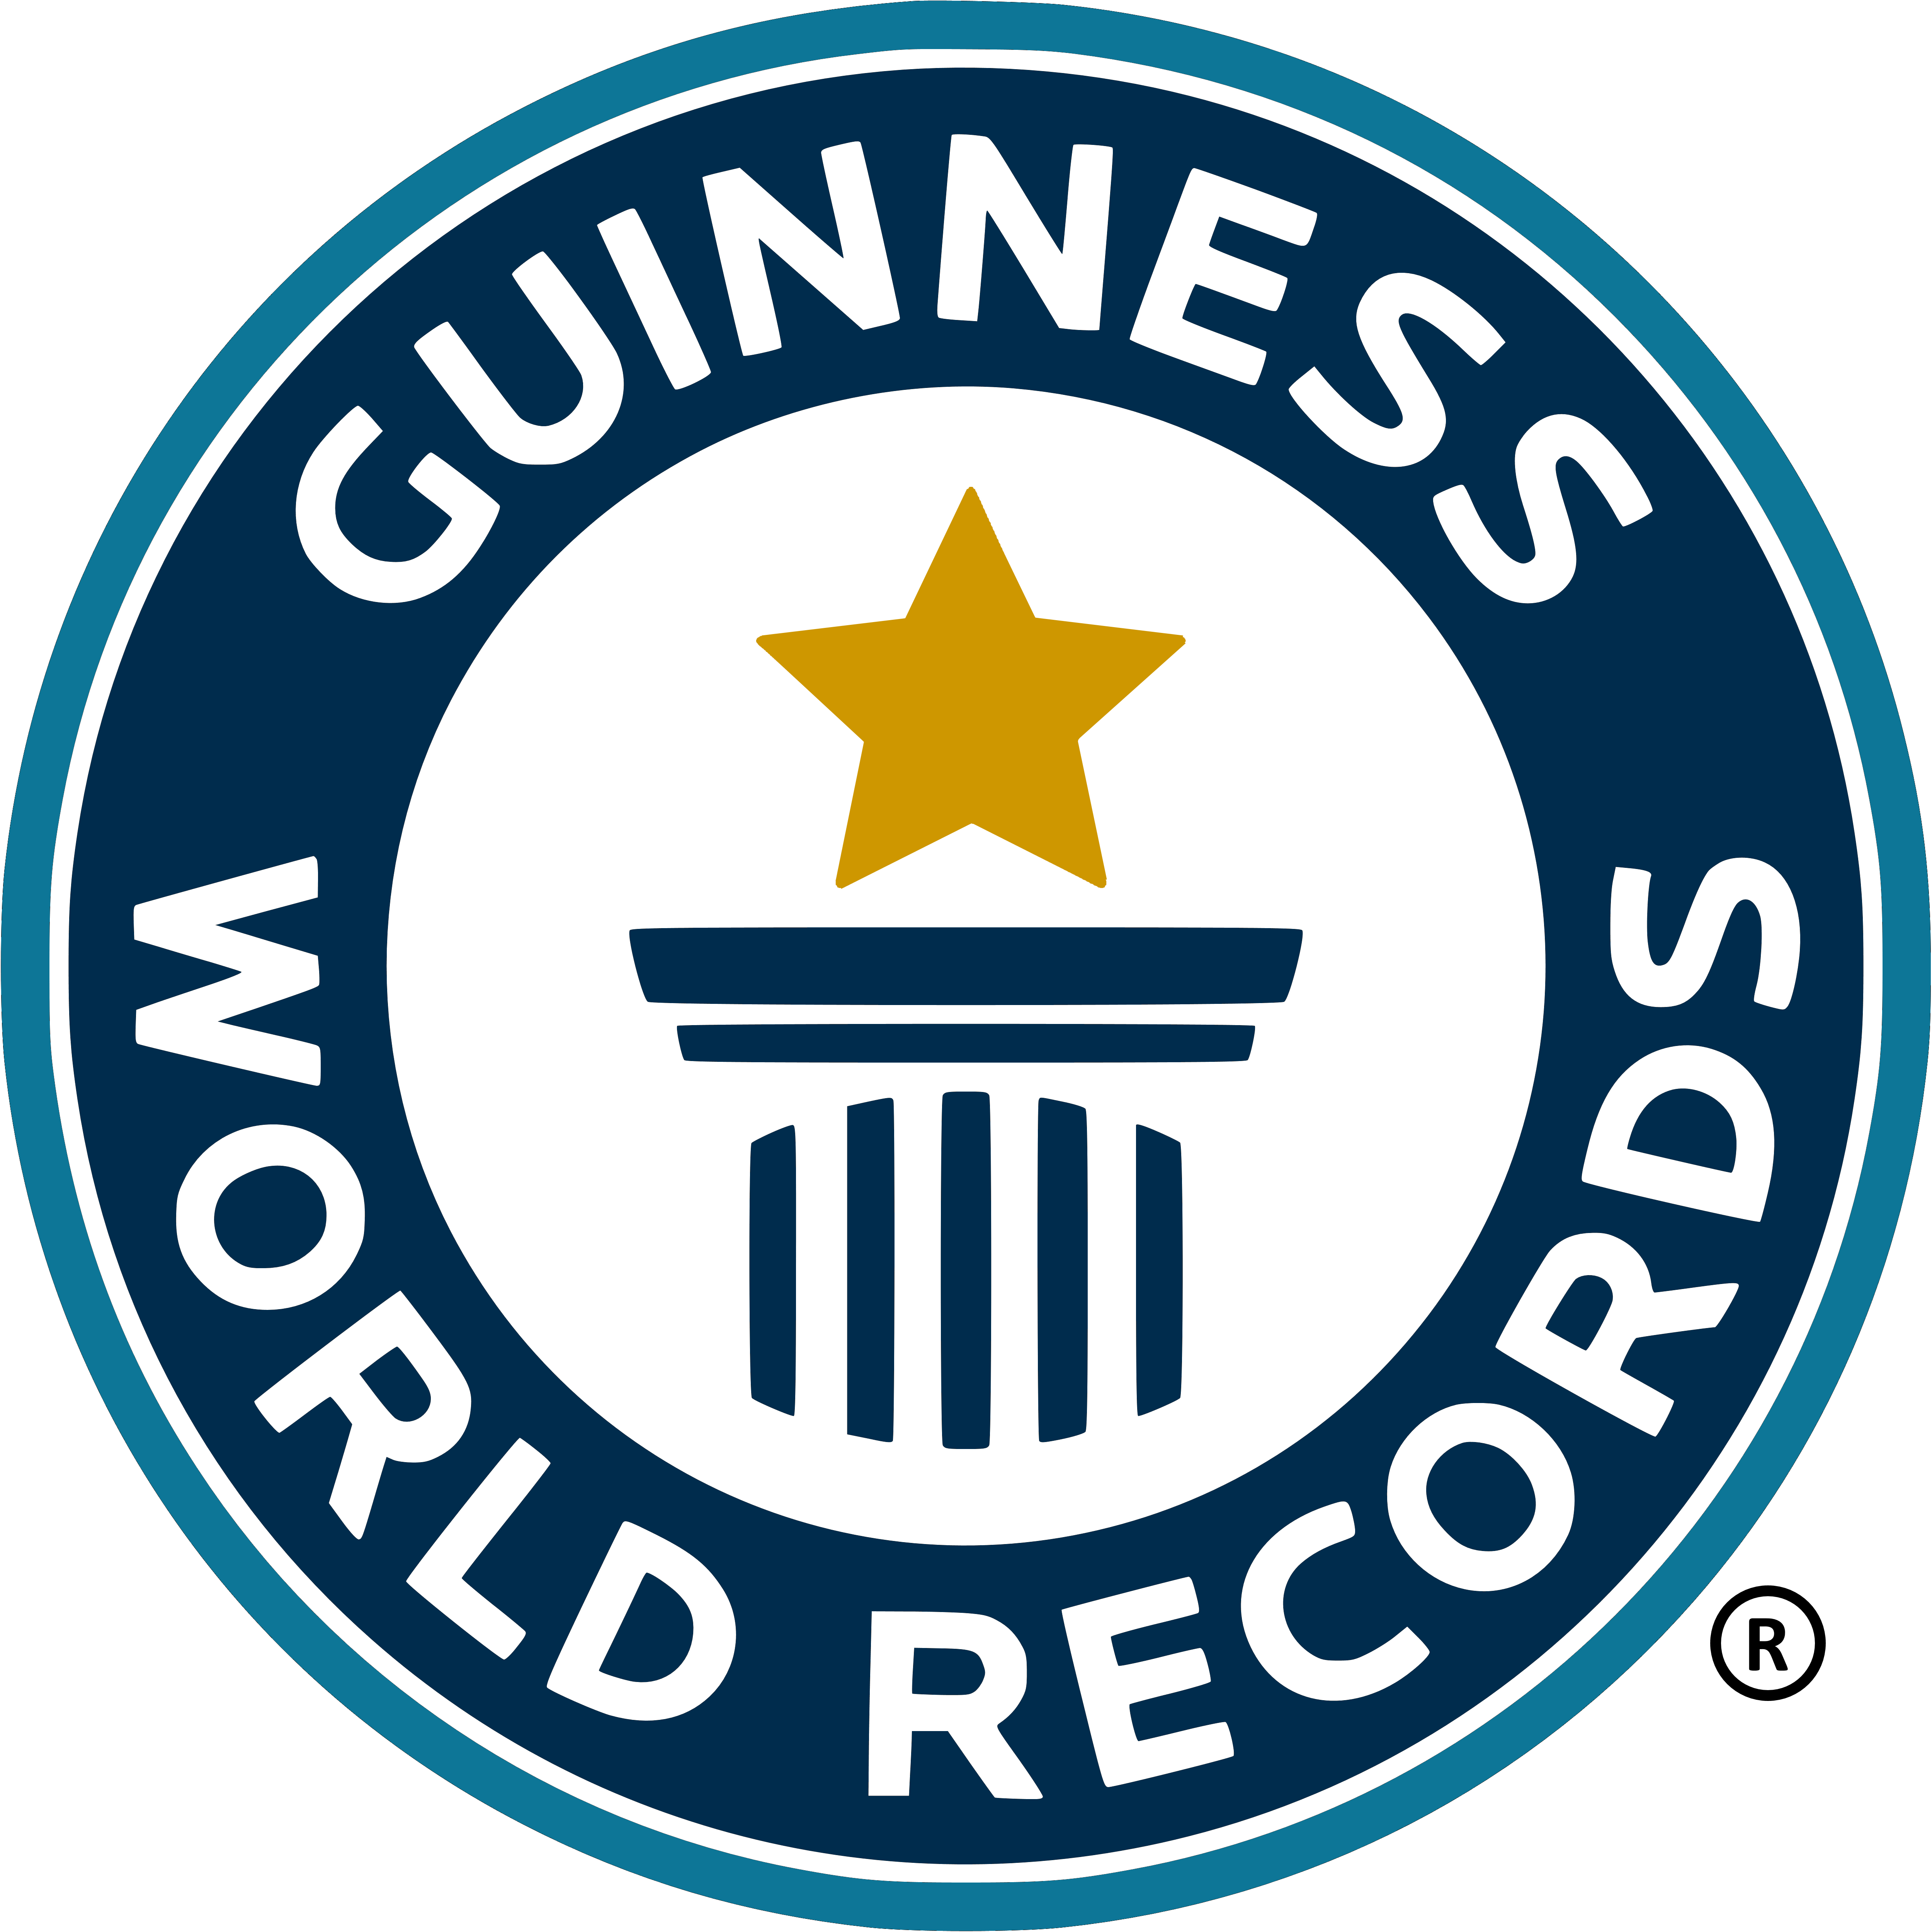 guinness-world-records-logos-download